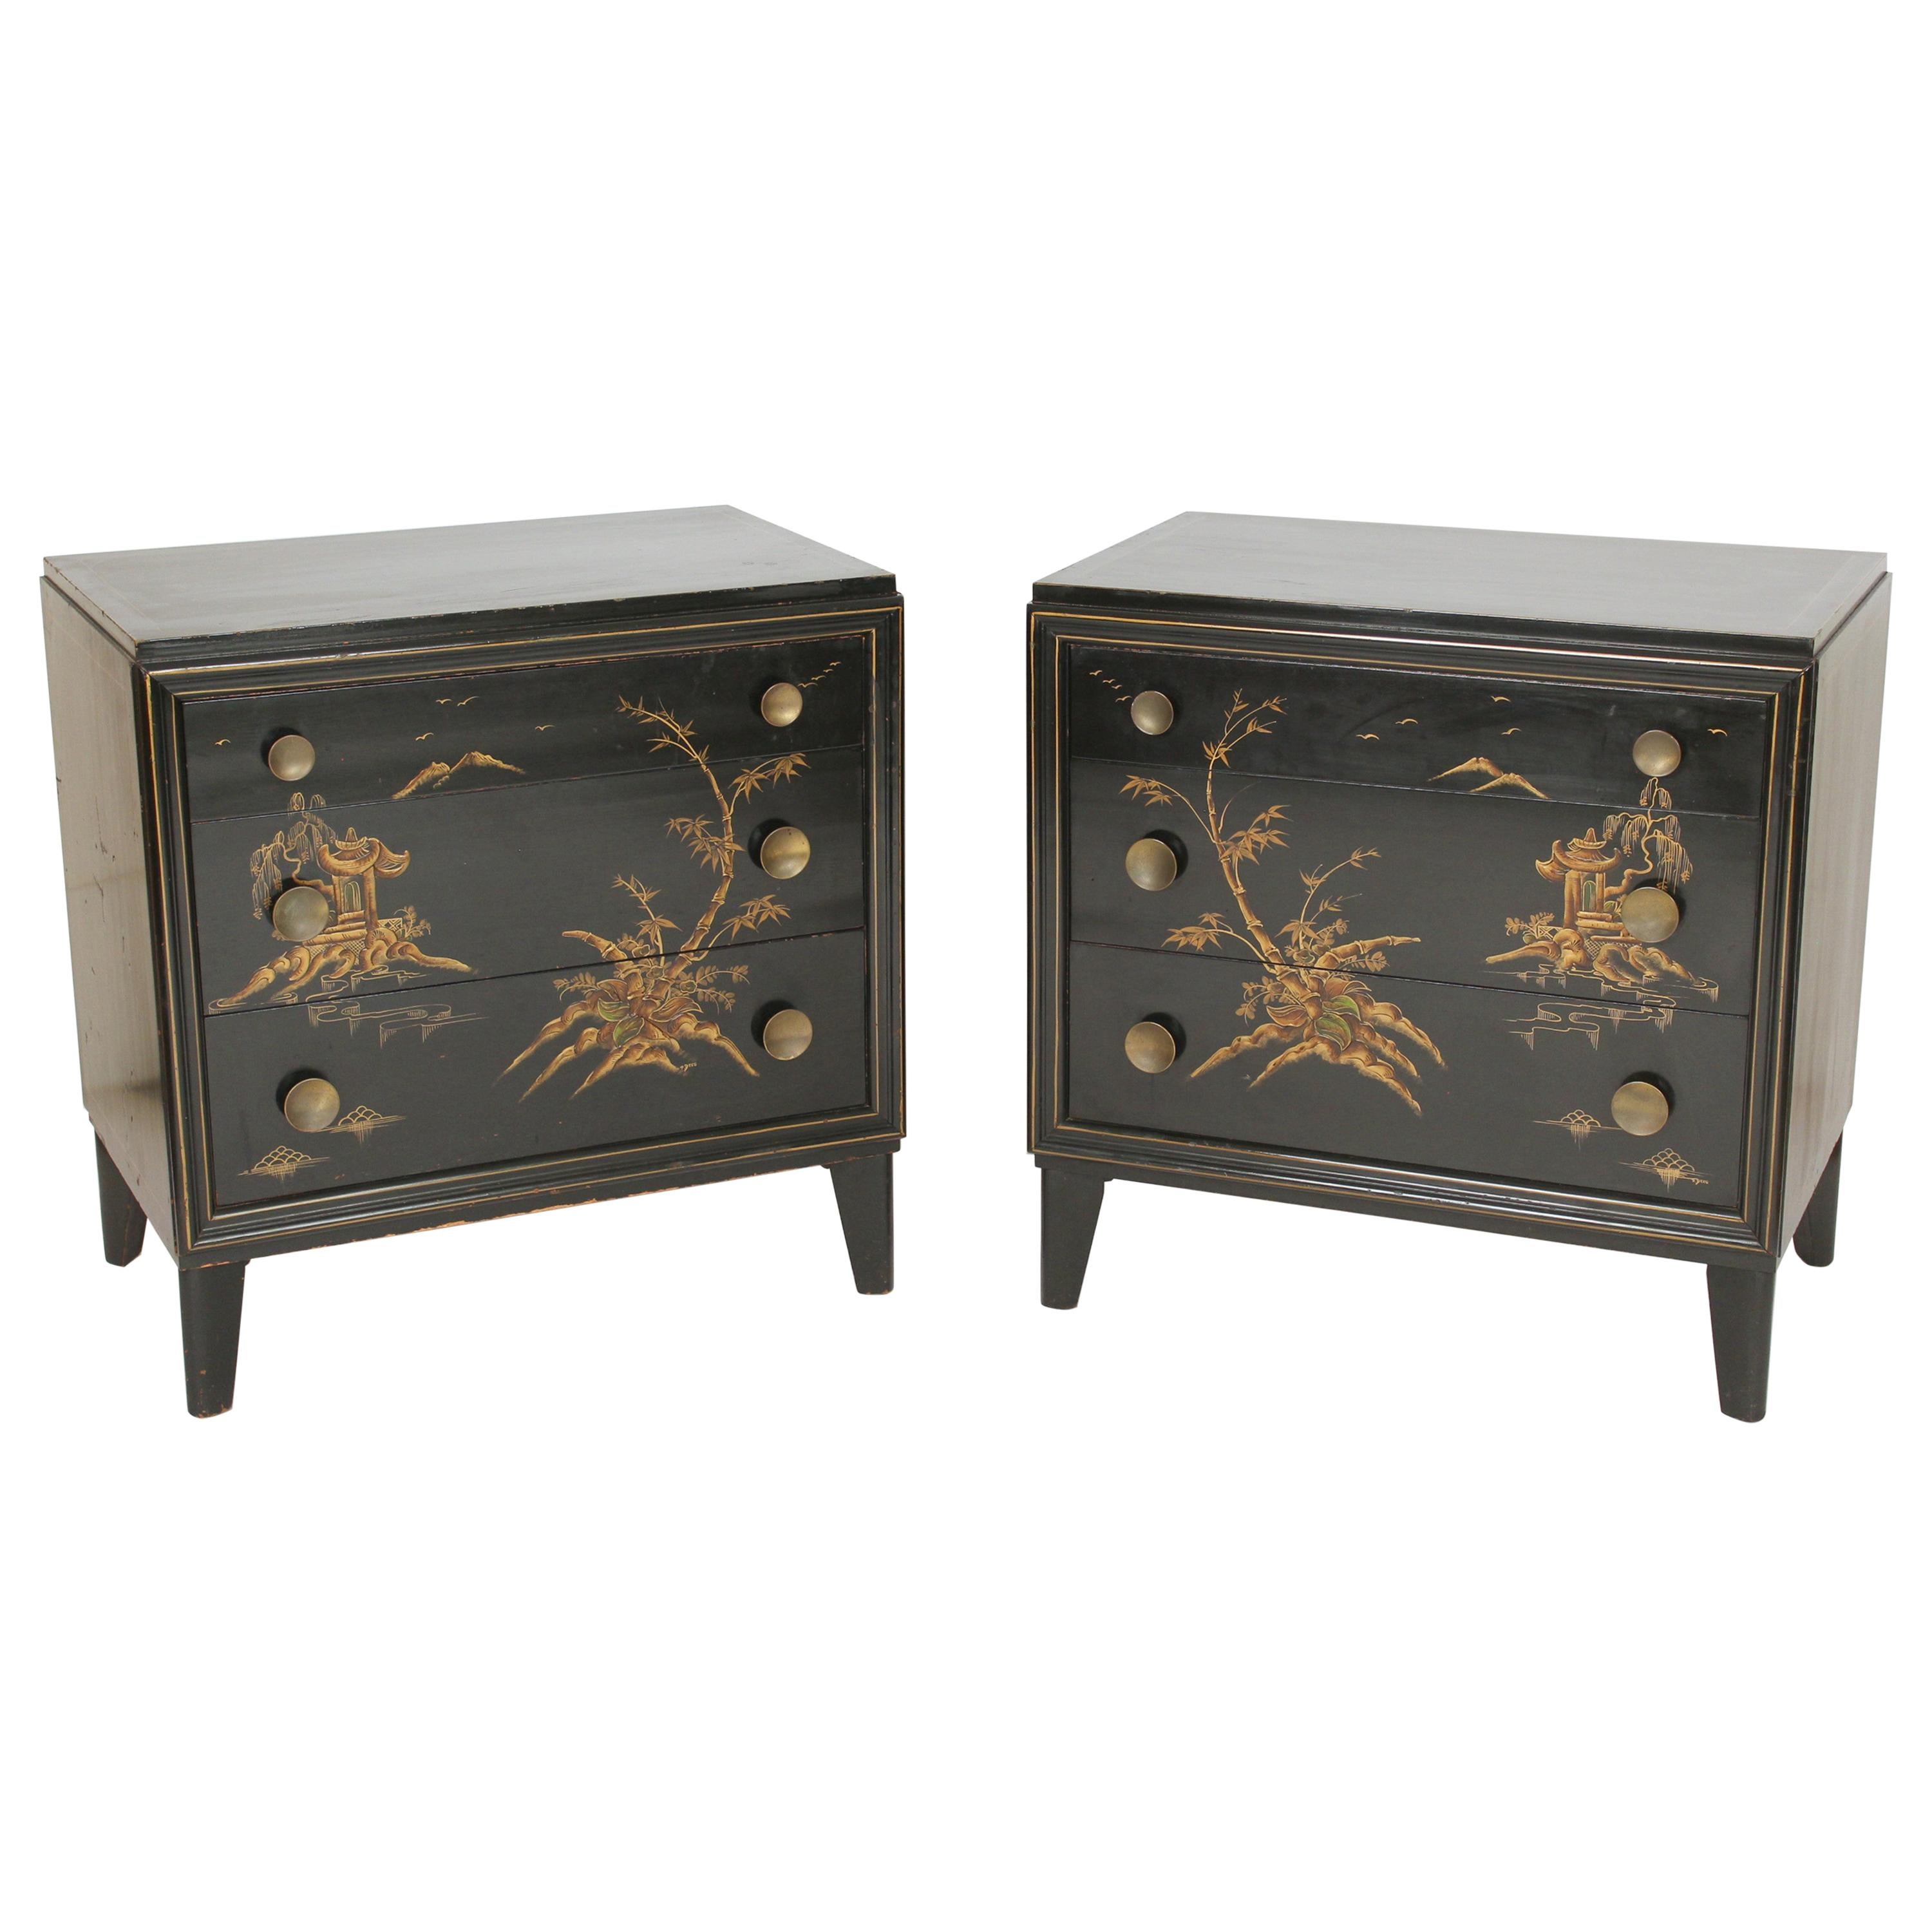 Pair of Mid-Century Modern Chinoiserie Decorated Chests of Drawers